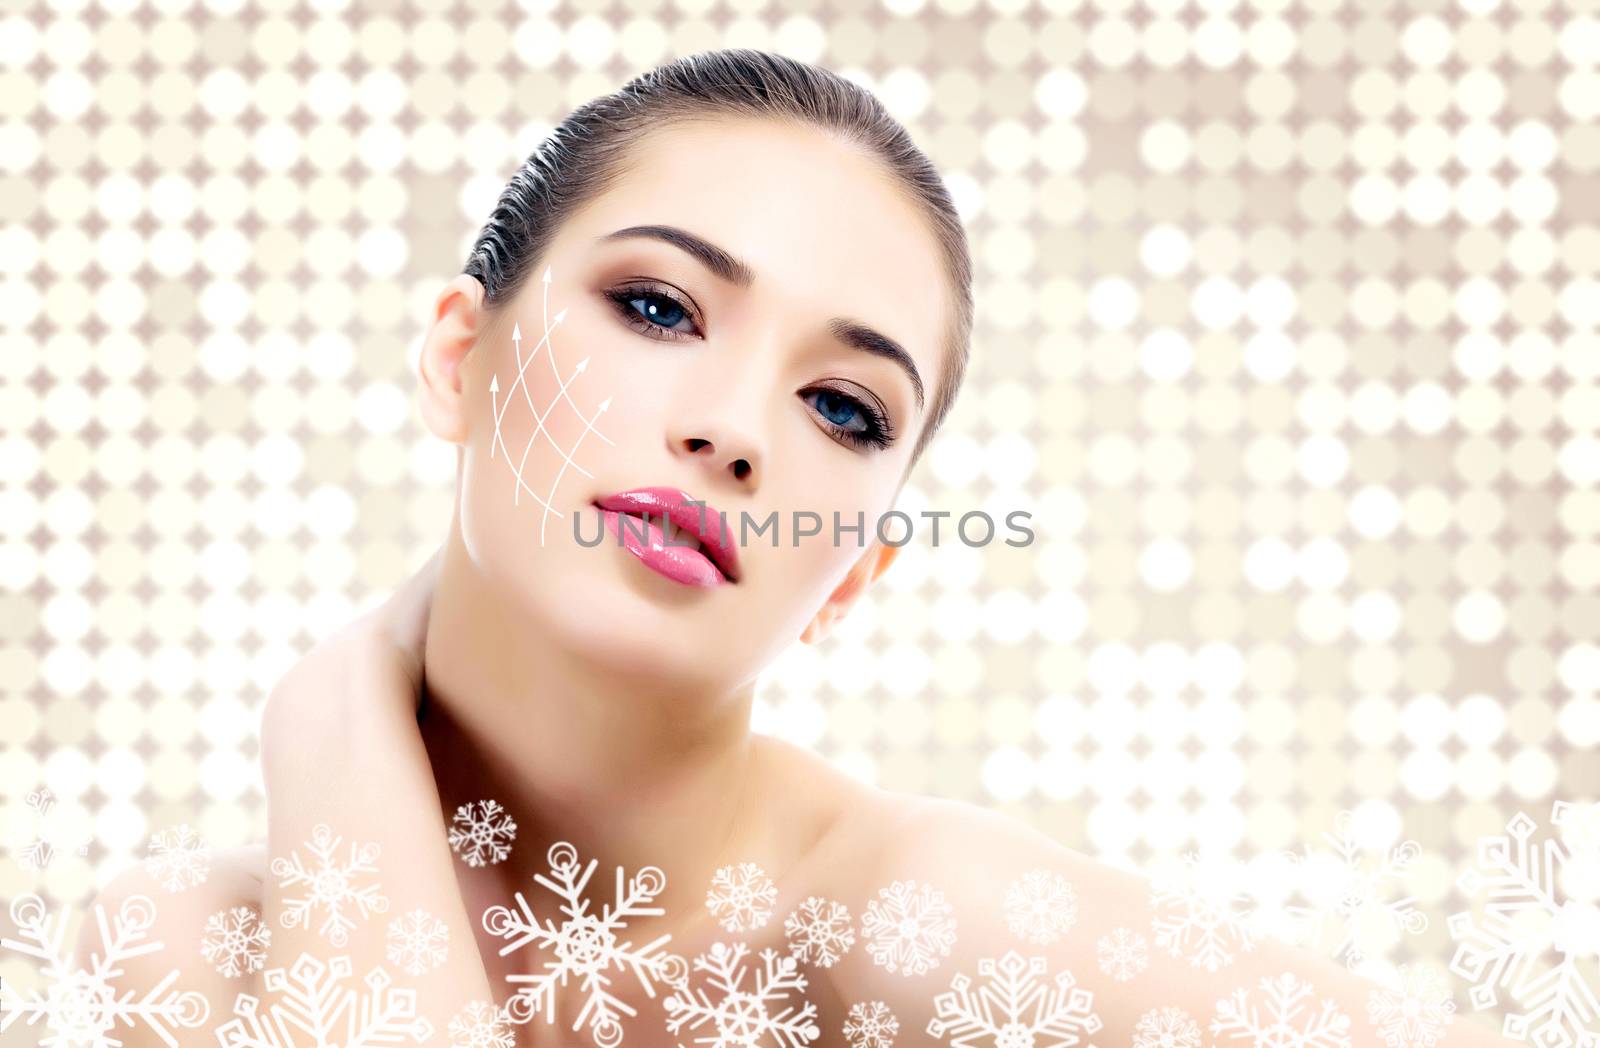 Young beautiful woman with clean fresh skin, abstract background with snowflakes